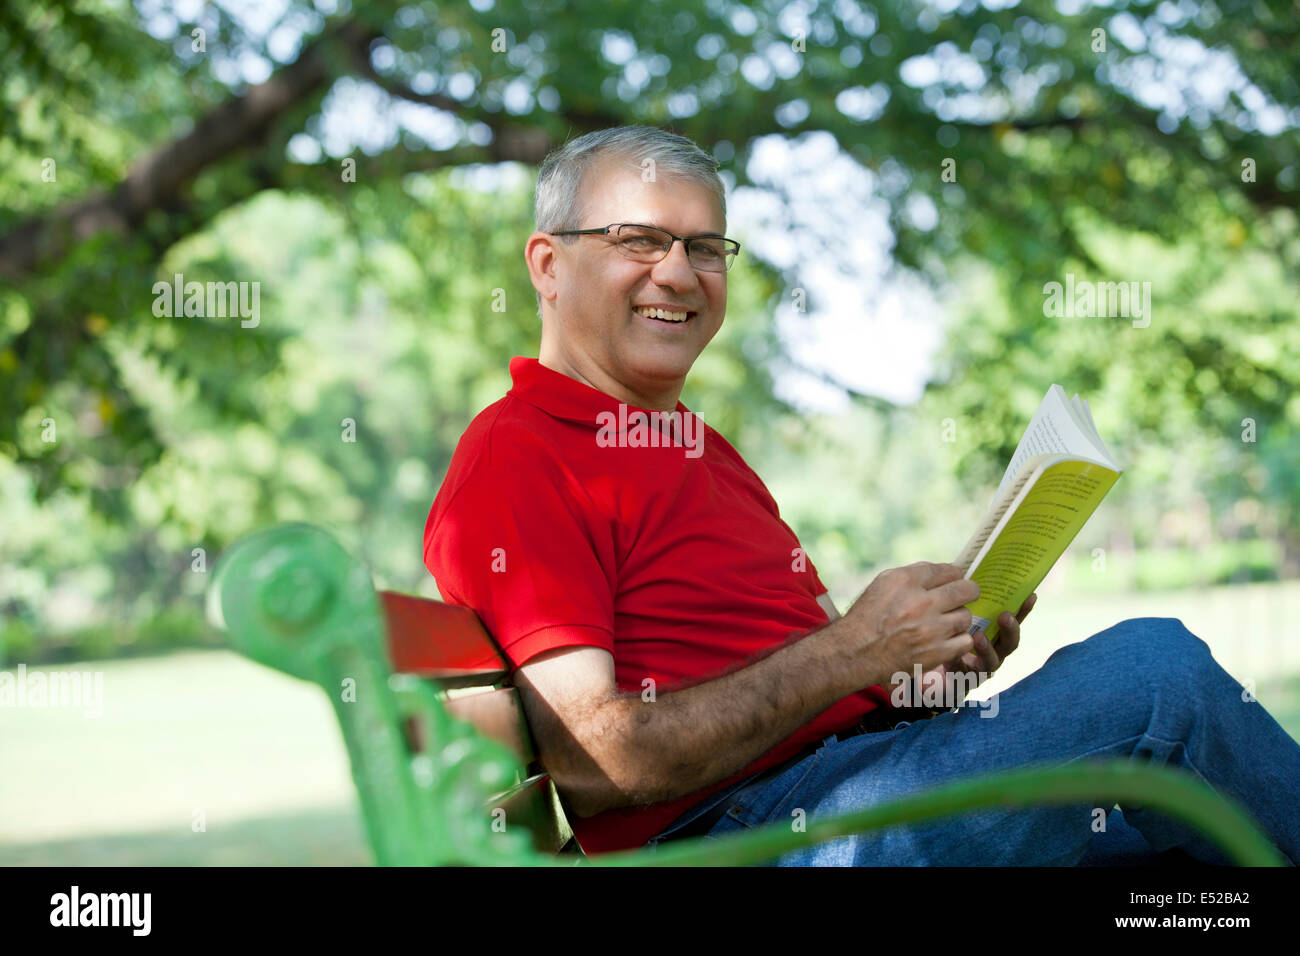 Portrait of a senior man reading a book in a park Stock Photo